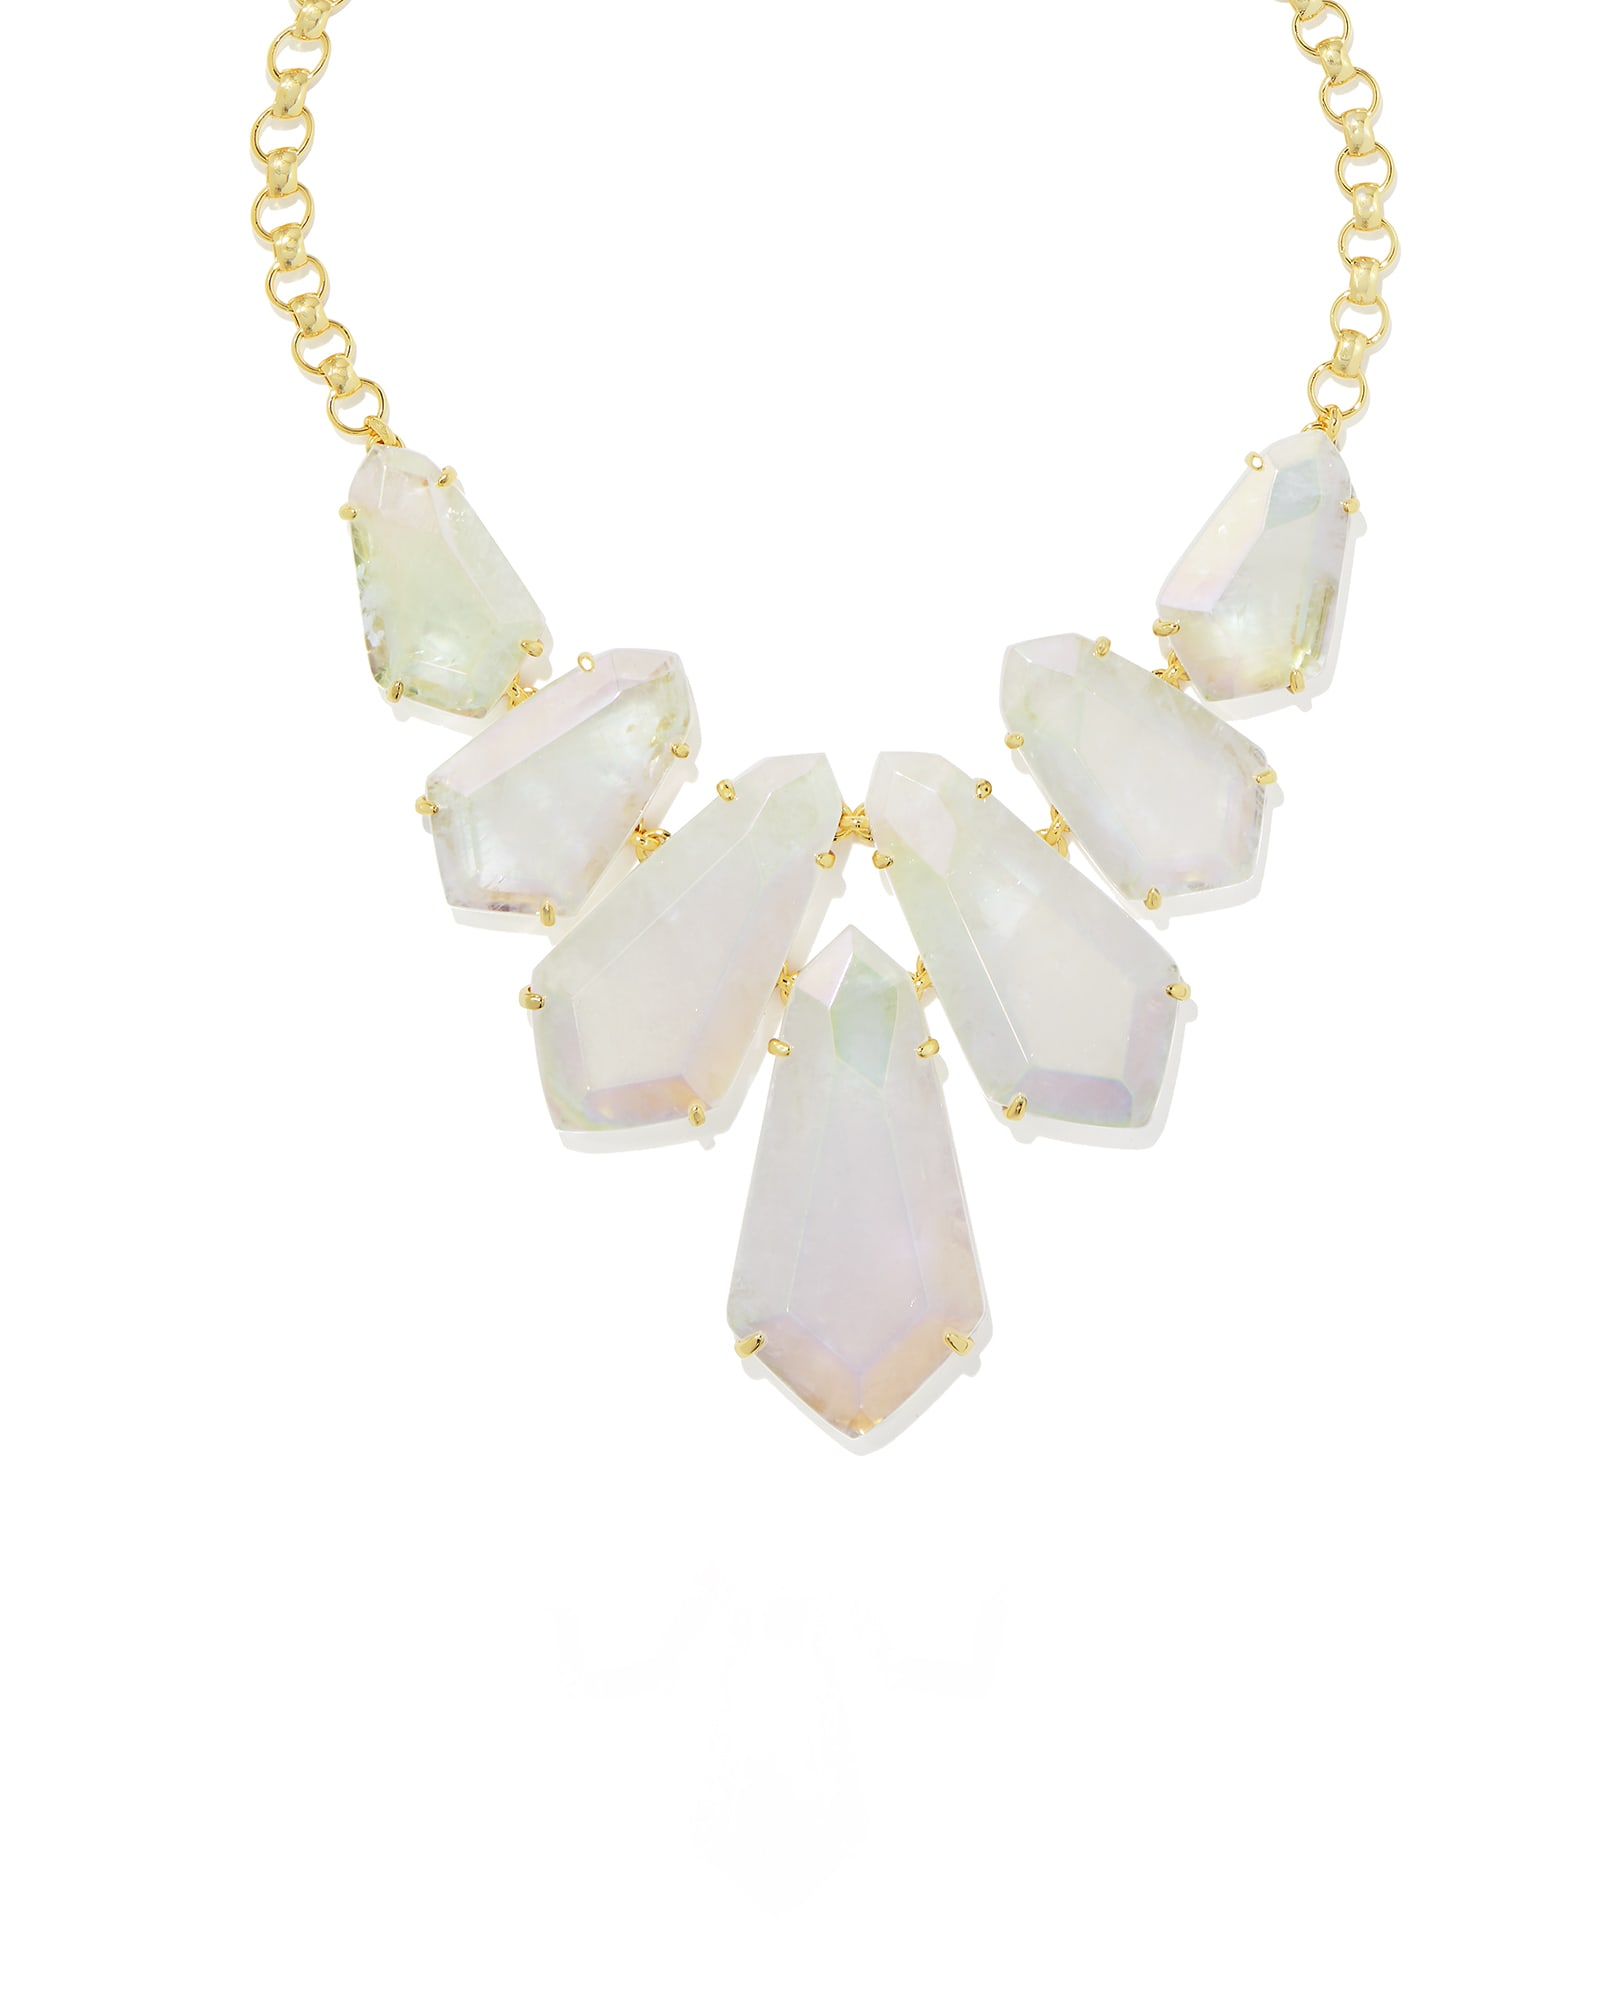 https://res.cloudinary.com/kendra-scott/image/upload/q_auto,f_auto,dpr_2/w_800,c_fit/Catalogs/kendrascott/November-Chase/Product-Images/kendra-scott-loris-statement-necklace-gold-iridescent-clear-rock-crystal-01.jpg